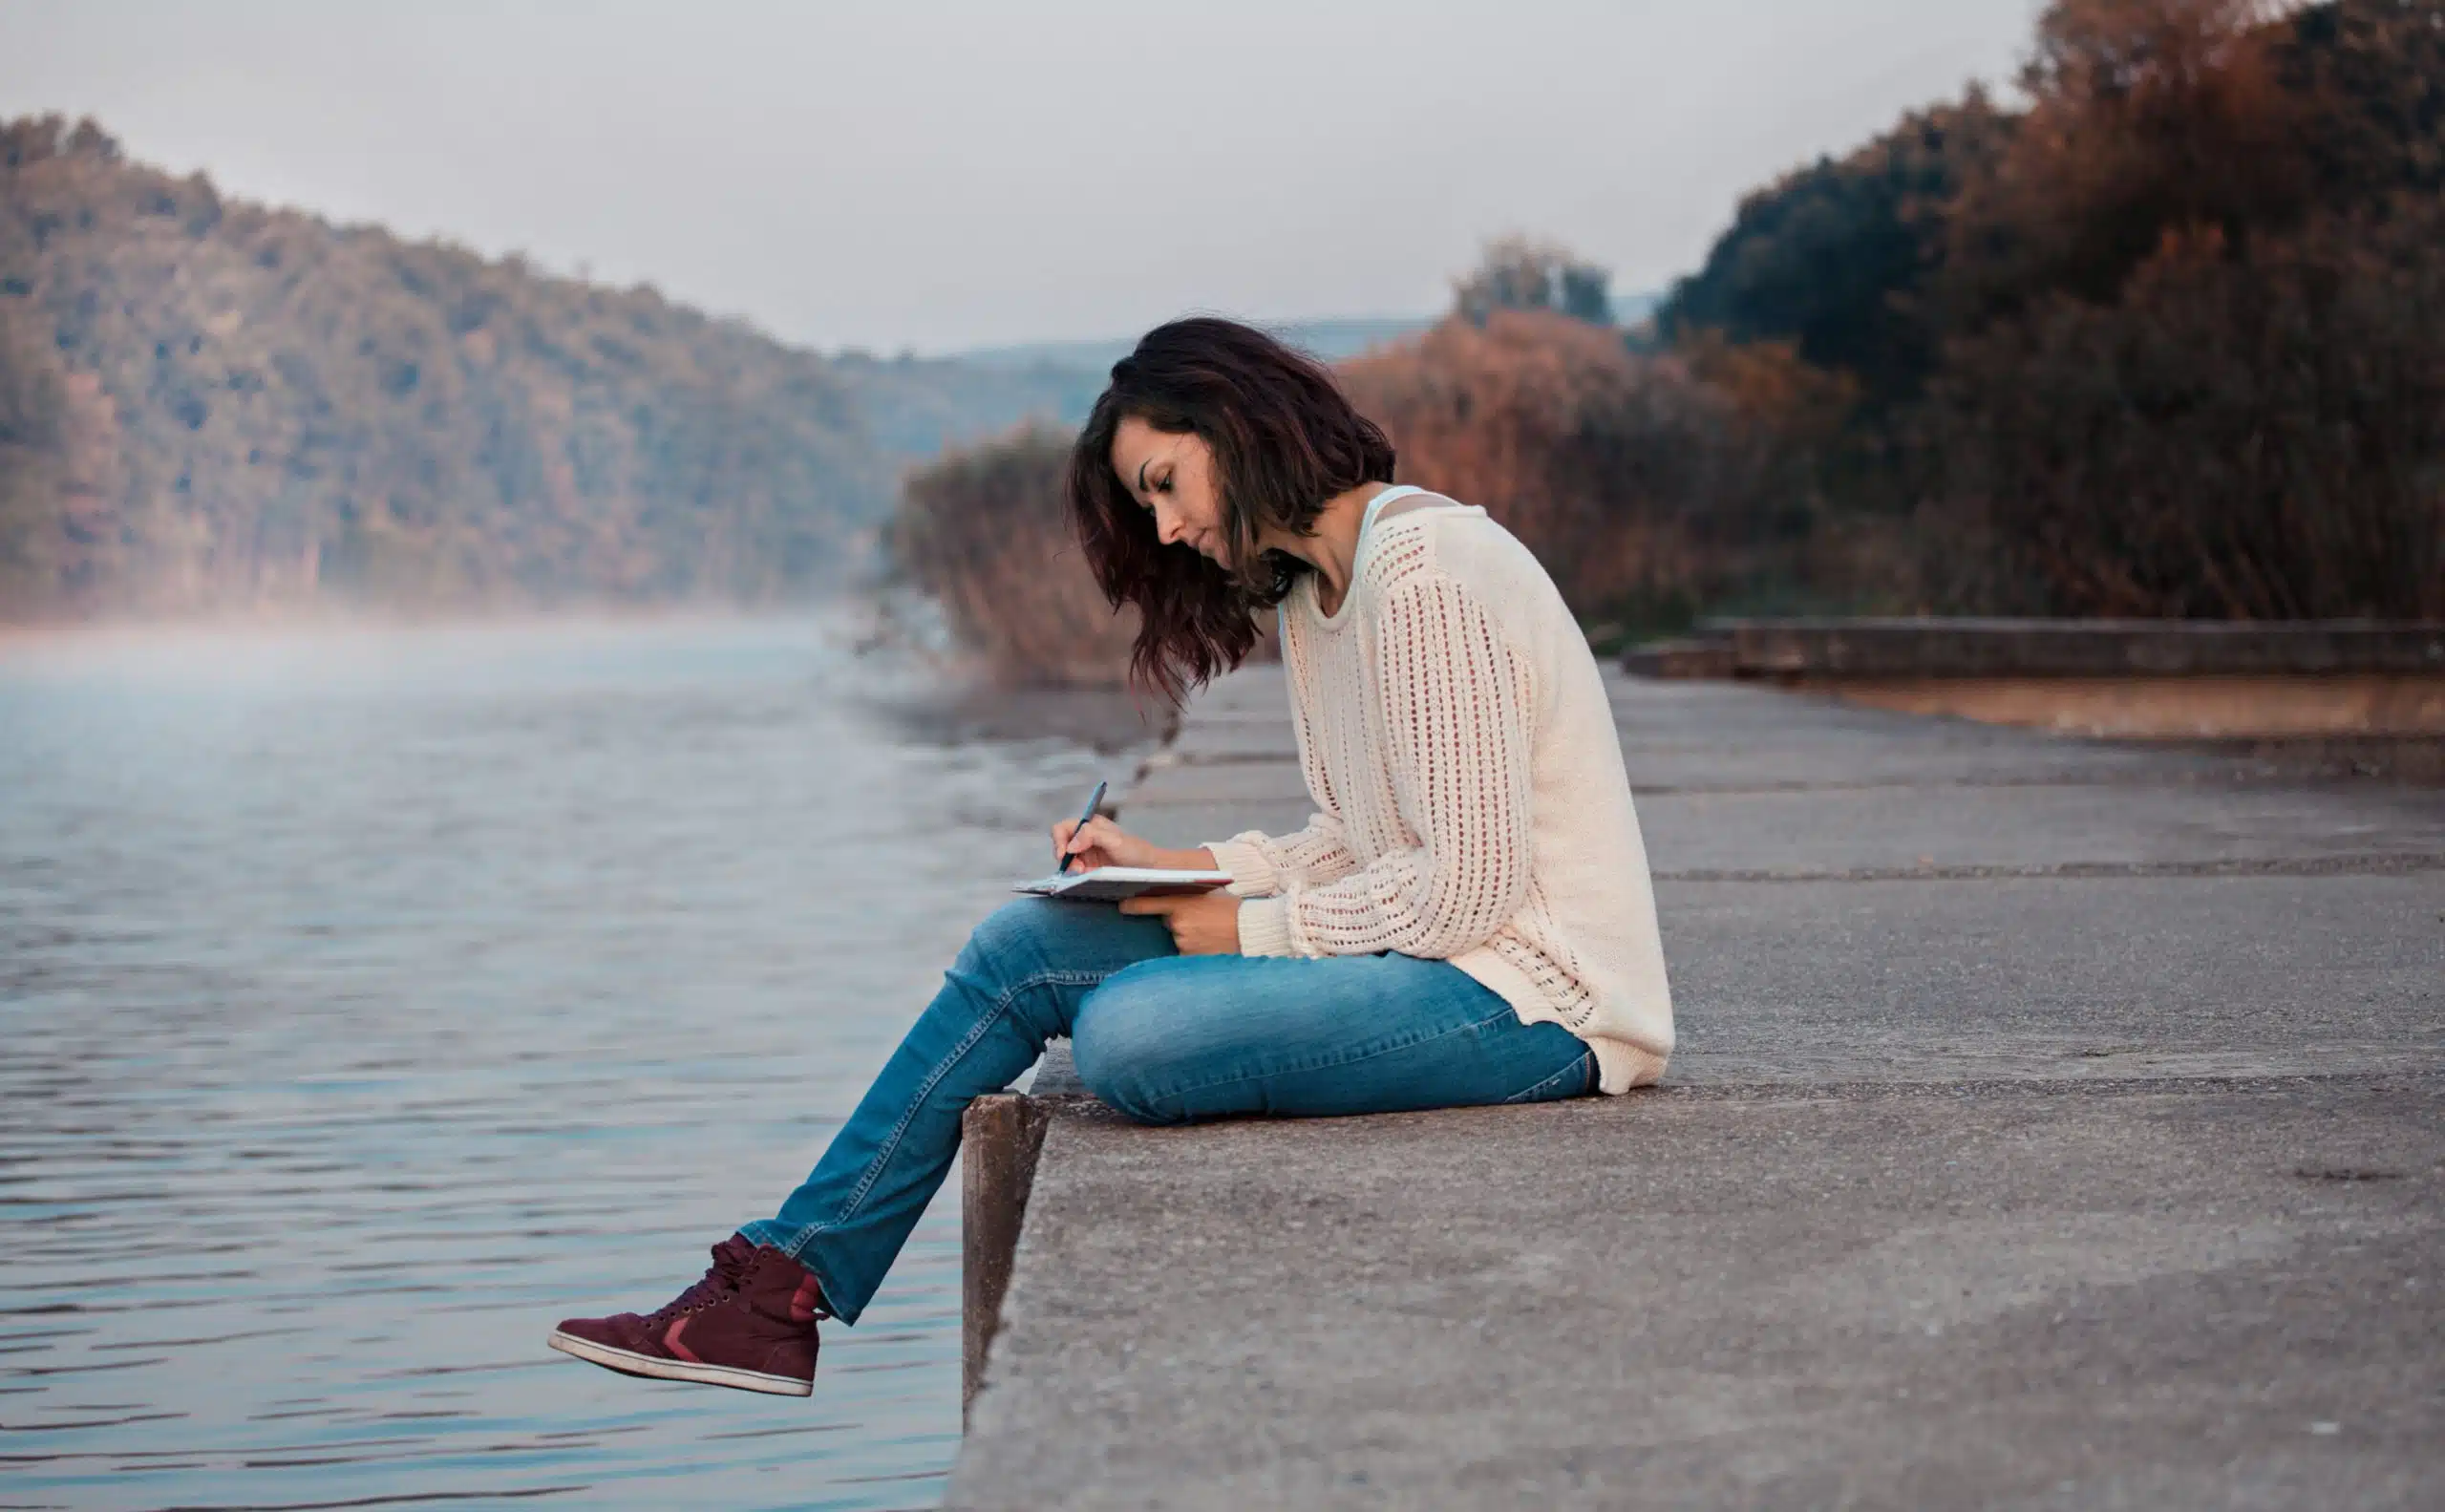 Woman in pensive mood seated at a dock writing on her notebook.